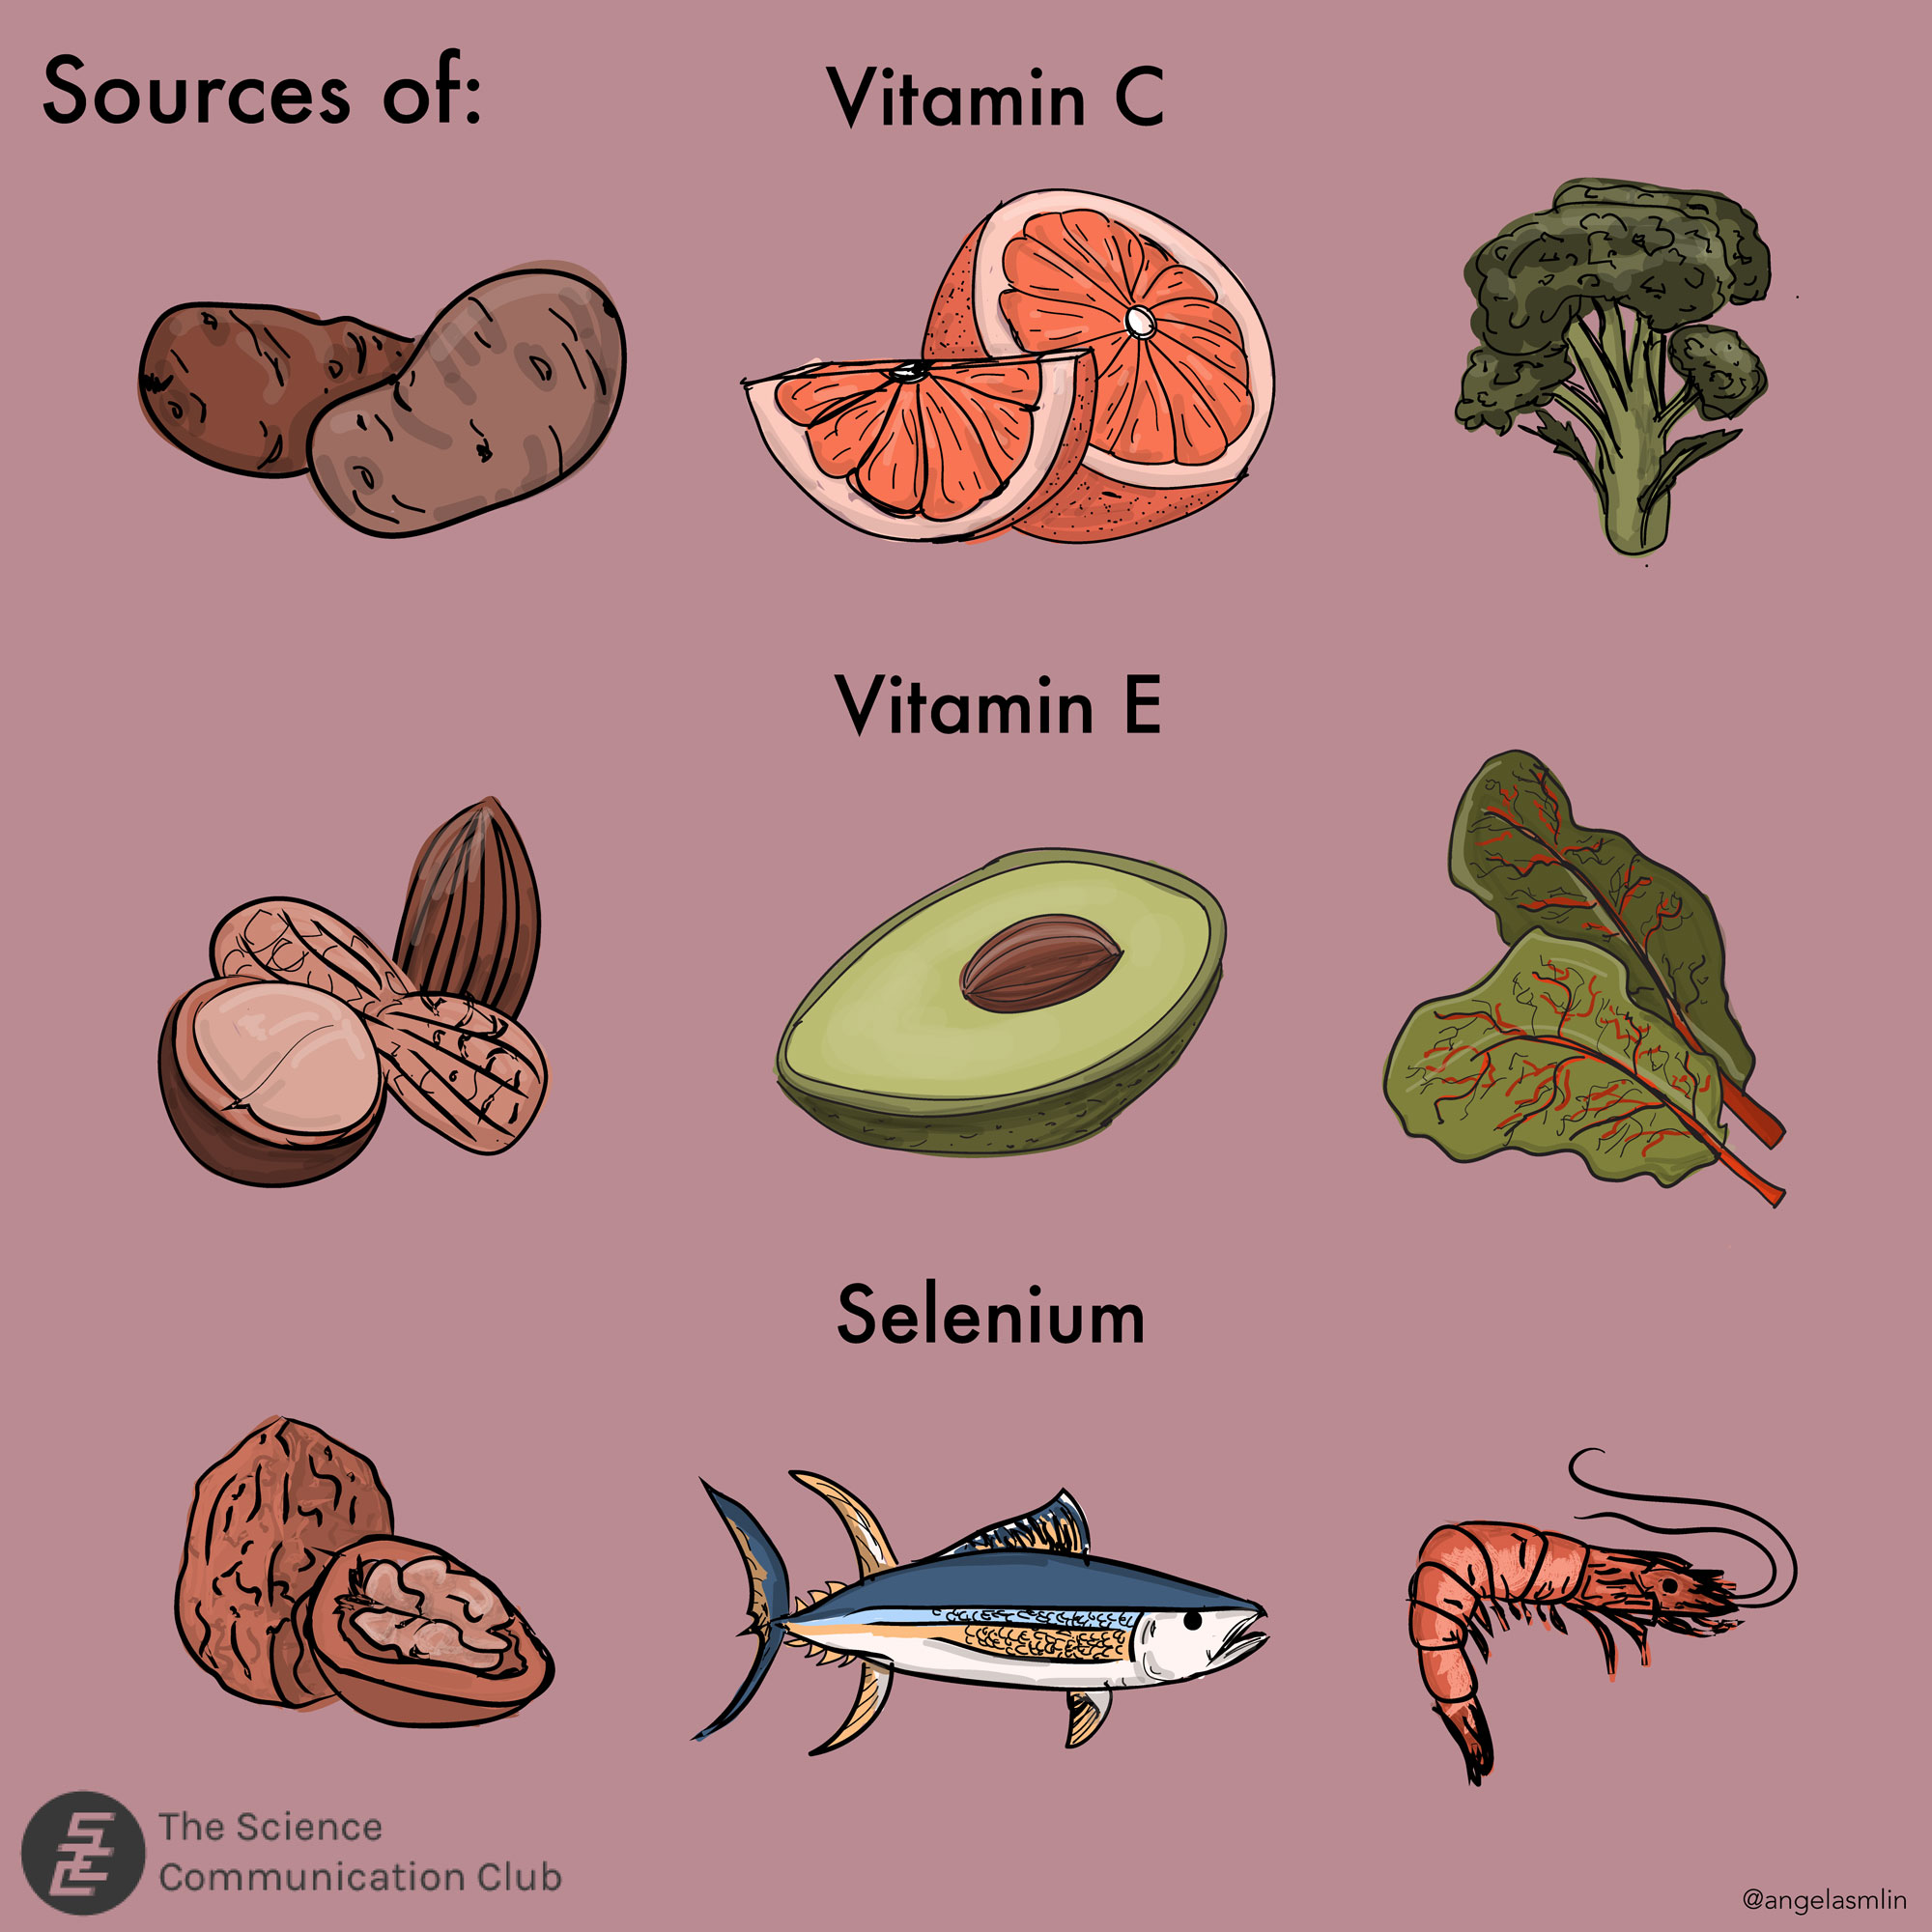 Sources for antioxidants such as vitamin C, vitamin E, and selenium.